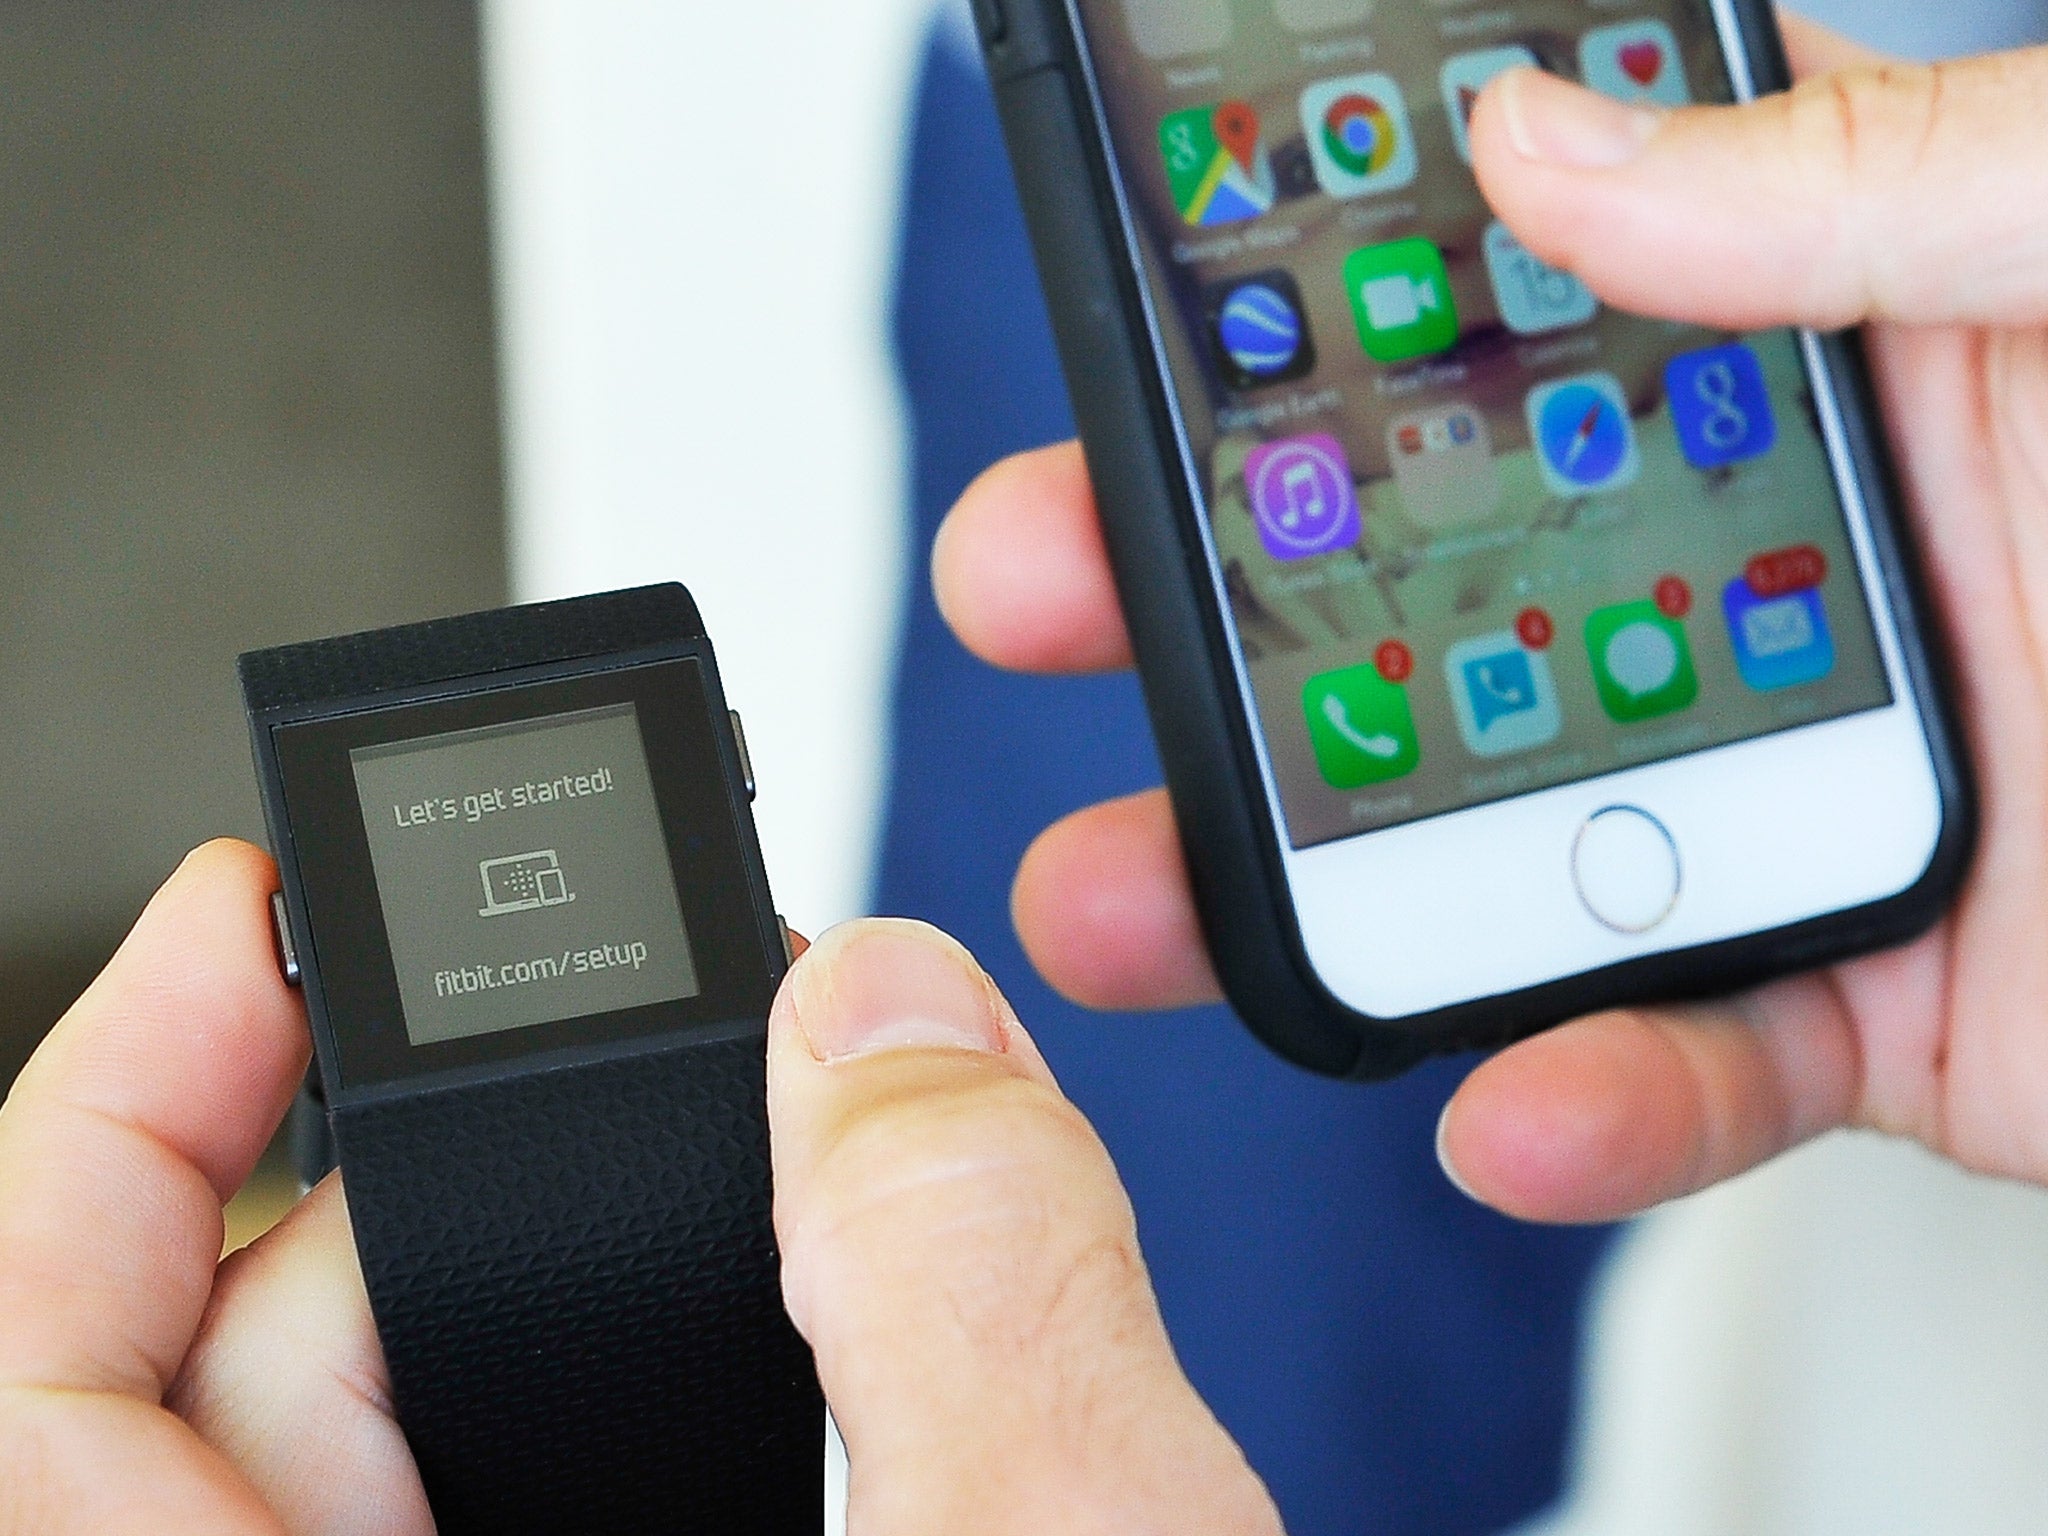 Gadgets such as Fitbit monitor how much exercise you're getting